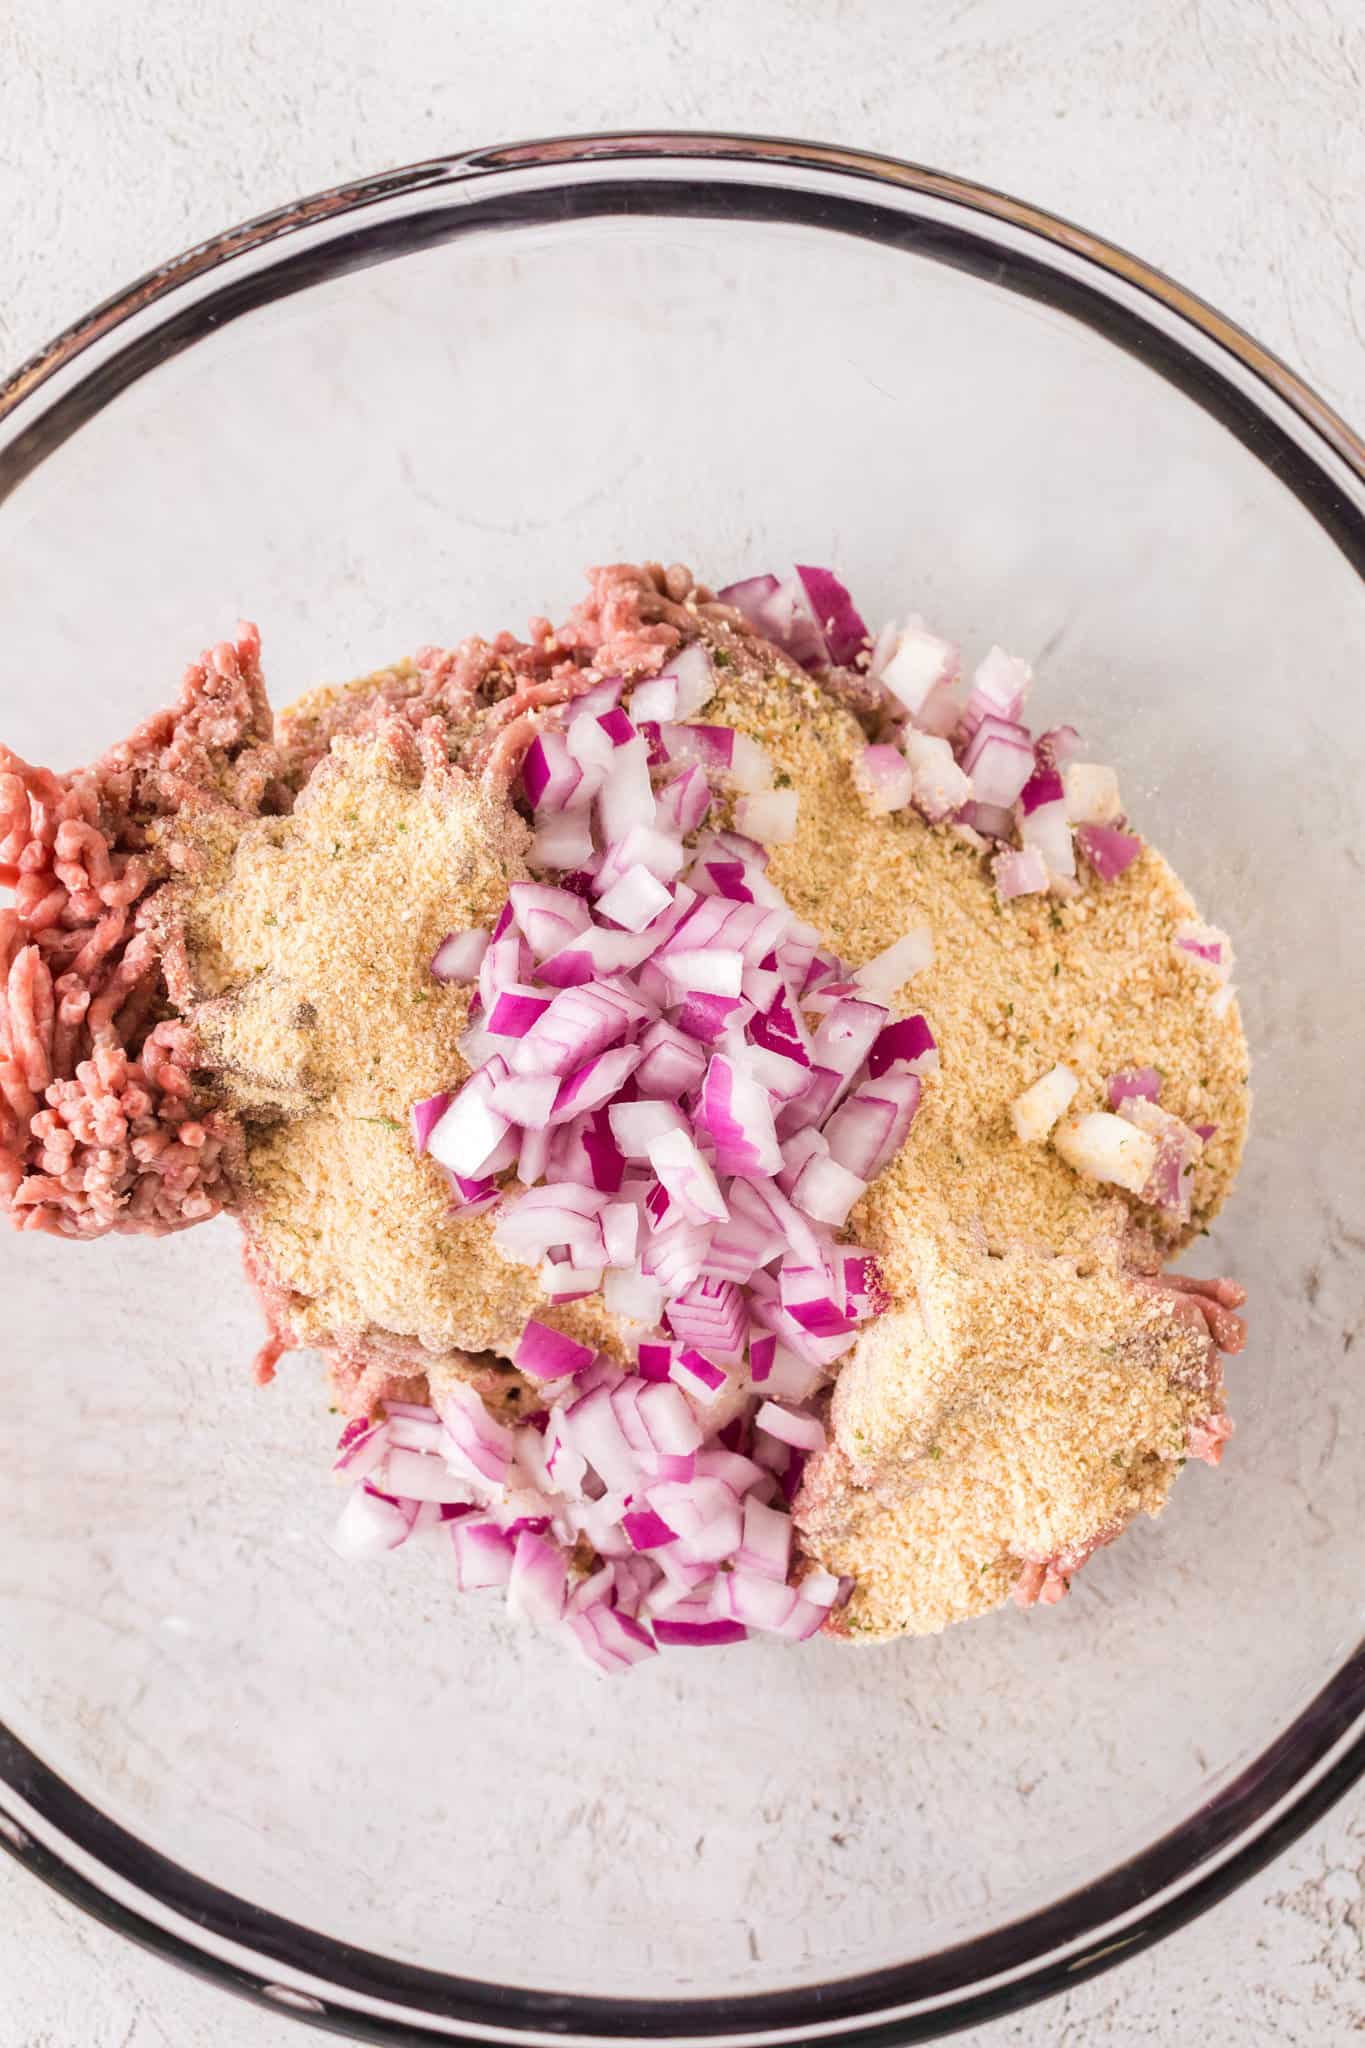 diced onions, bread crumbs and ground beef mixture in a mixing bowl